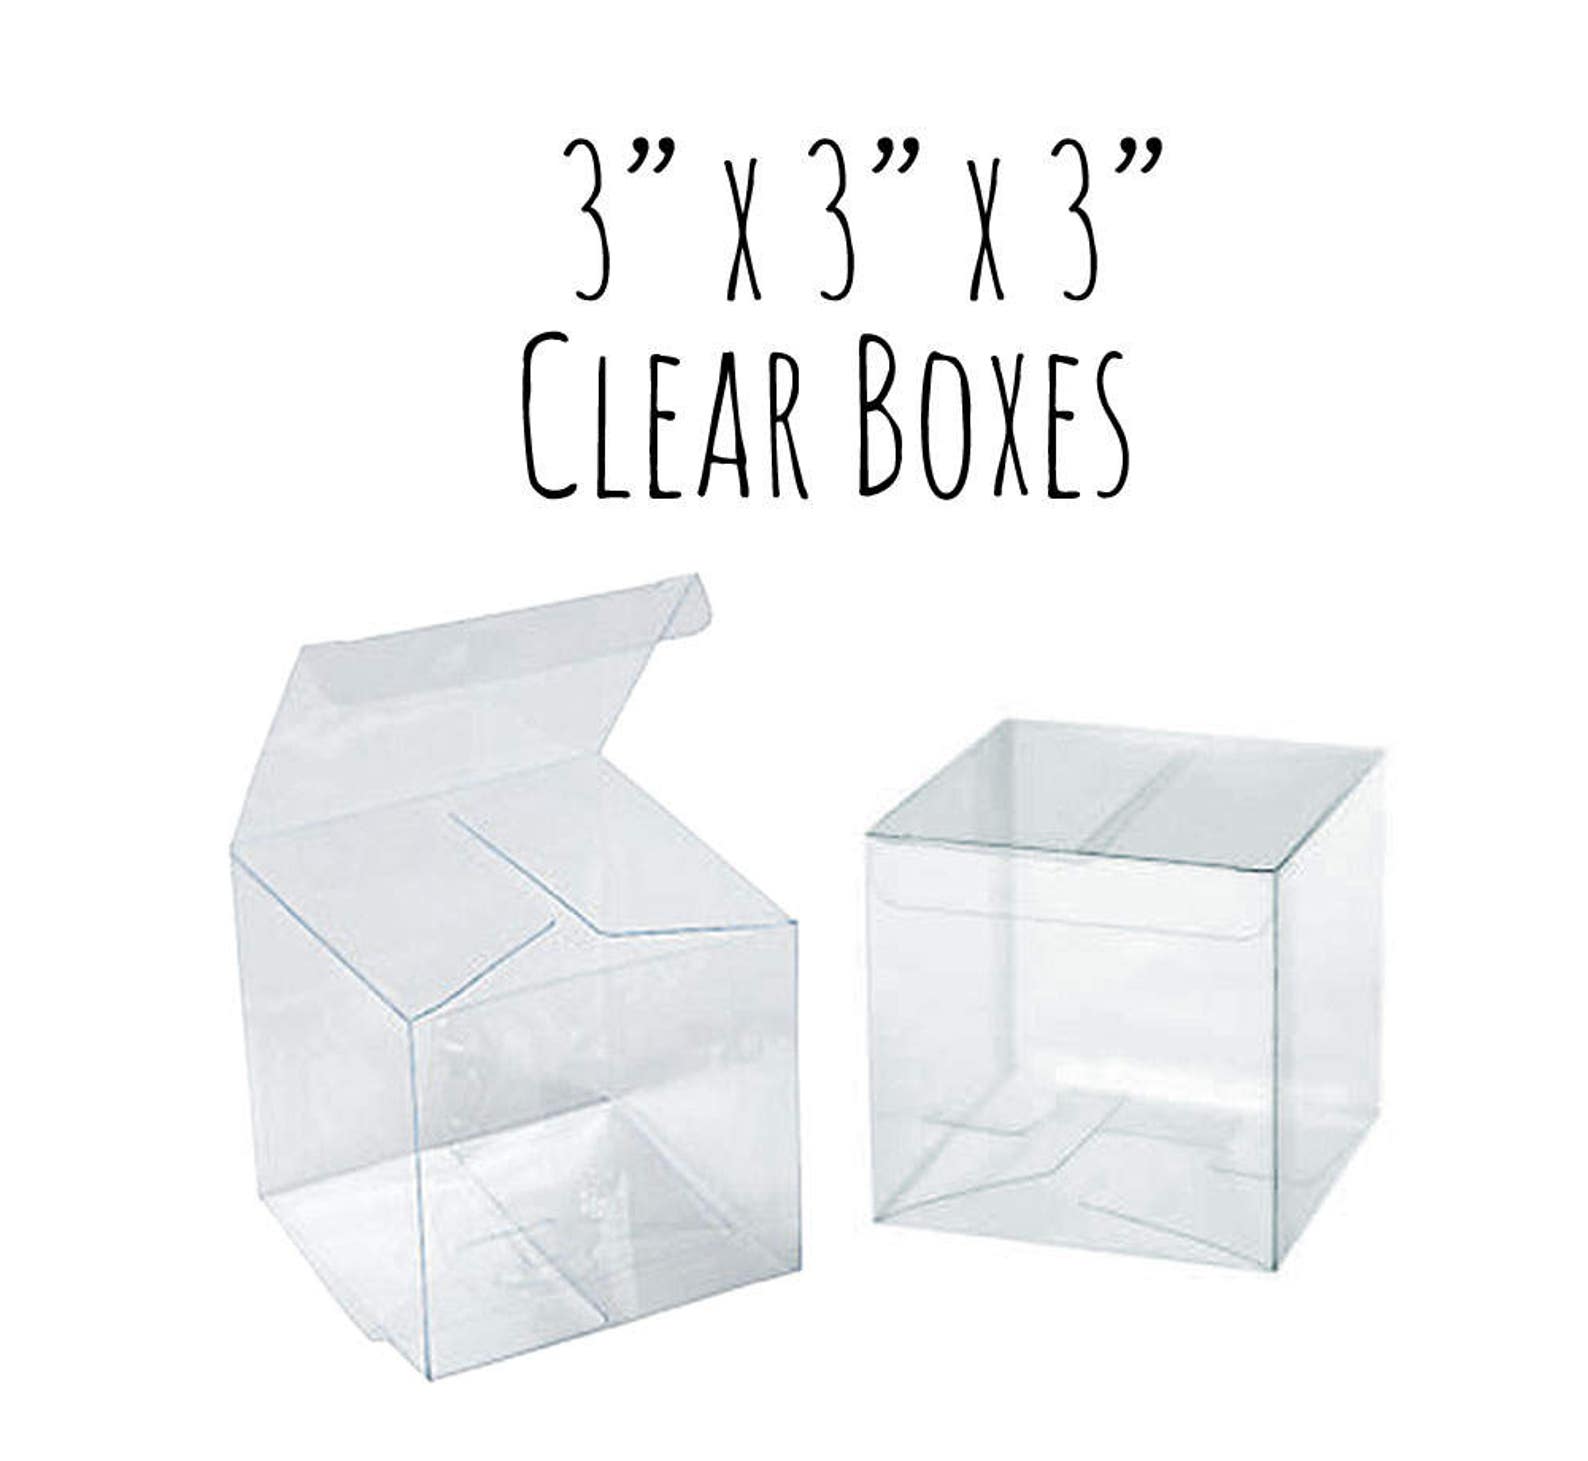 Clear box. Paper charcuterie Boxes with Clear Lids.